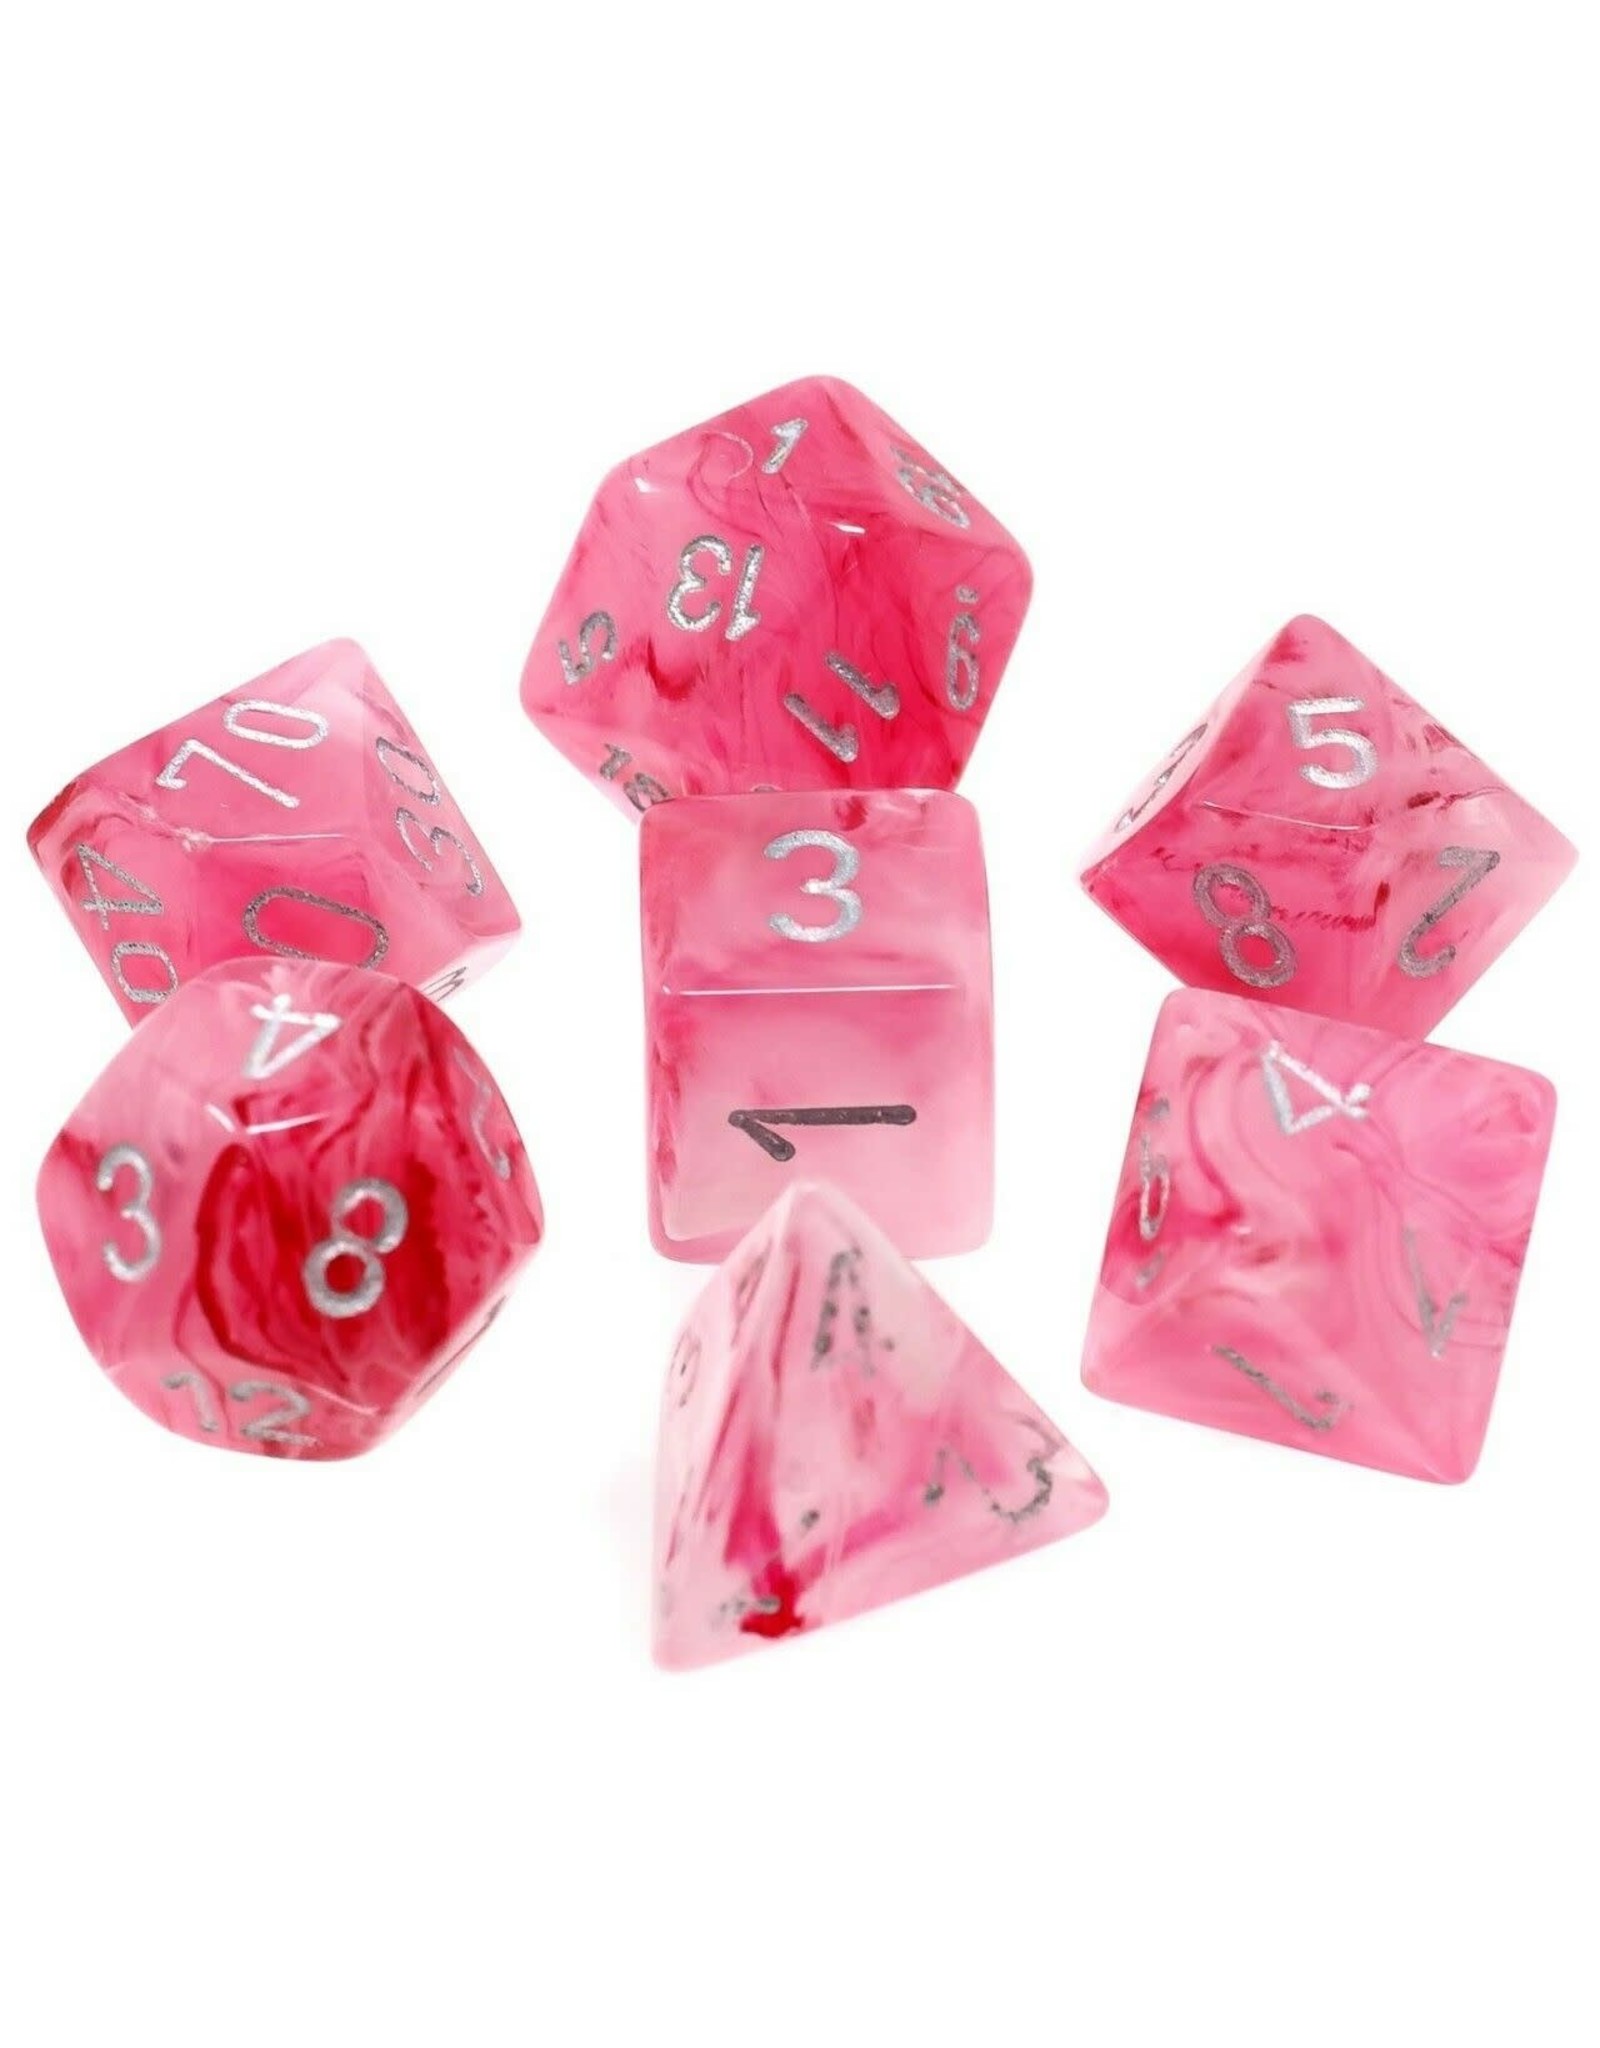 chessex Chessex 7ct Lab Dice Set - Ghostly Glow Pink/Silver